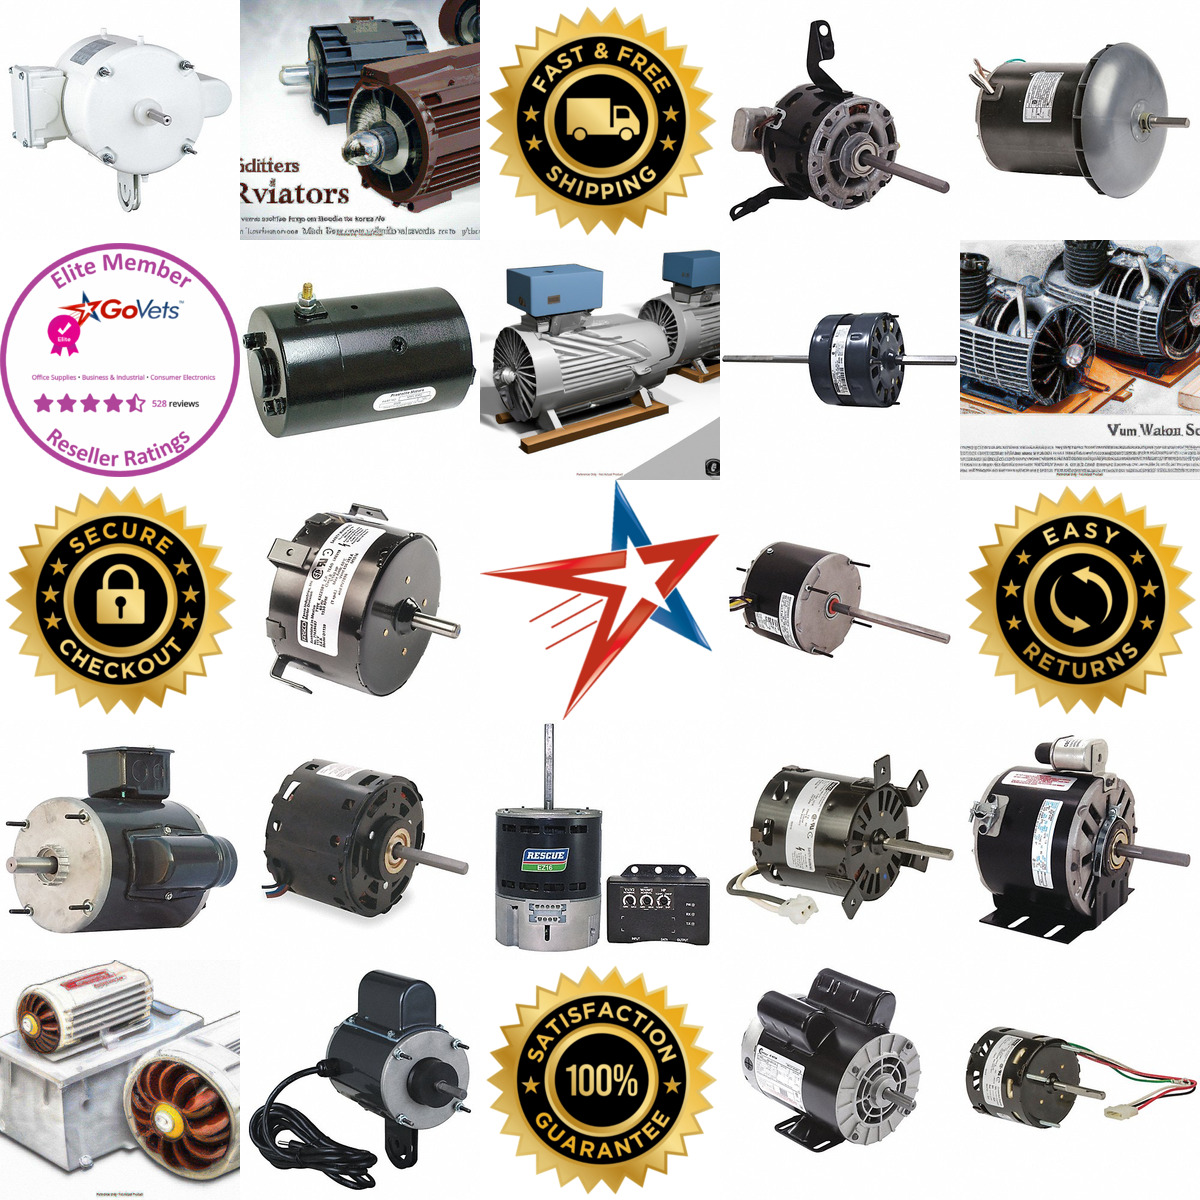 A selection of Oem Replacement Hvac Motors products on GoVets